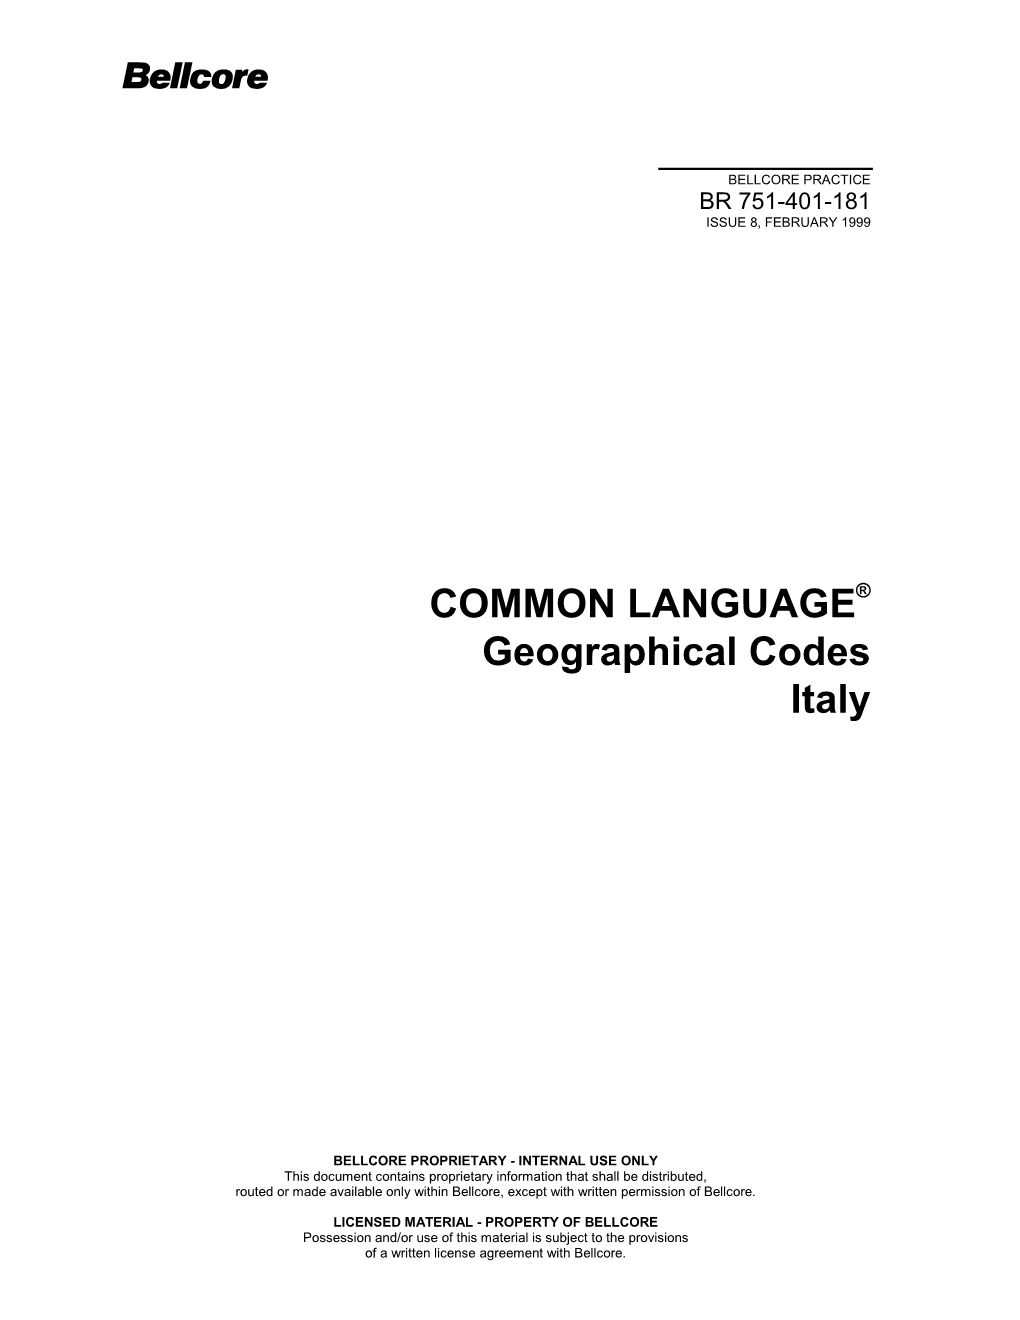 Common Language(R) Geographical Codes Italy